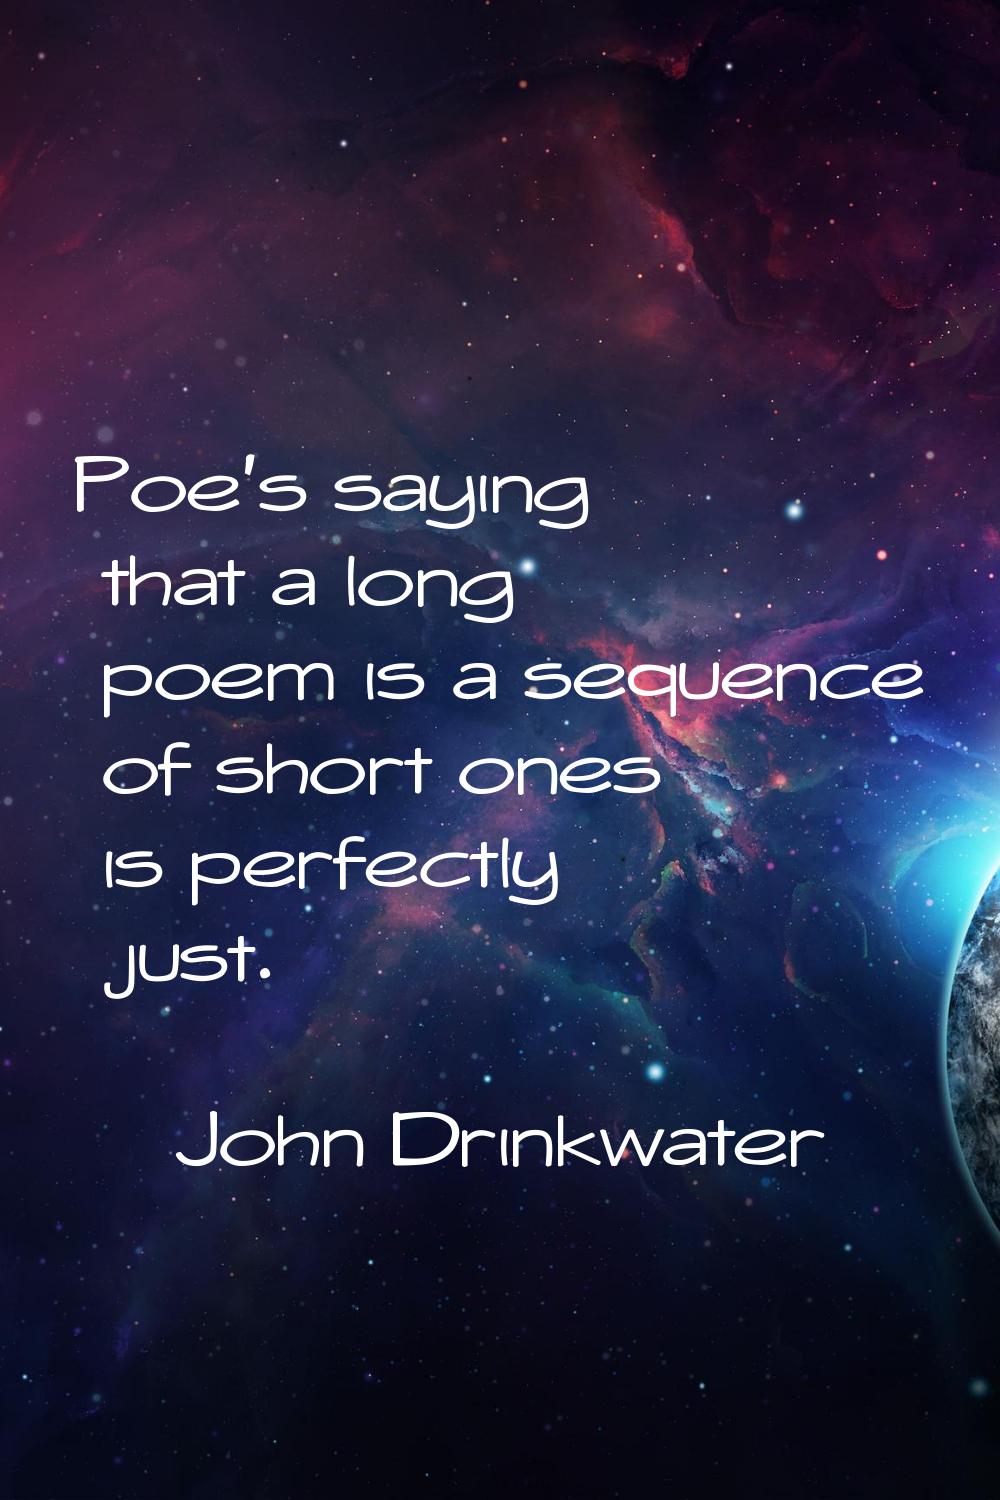 Poe's saying that a long poem is a sequence of short ones is perfectly just.